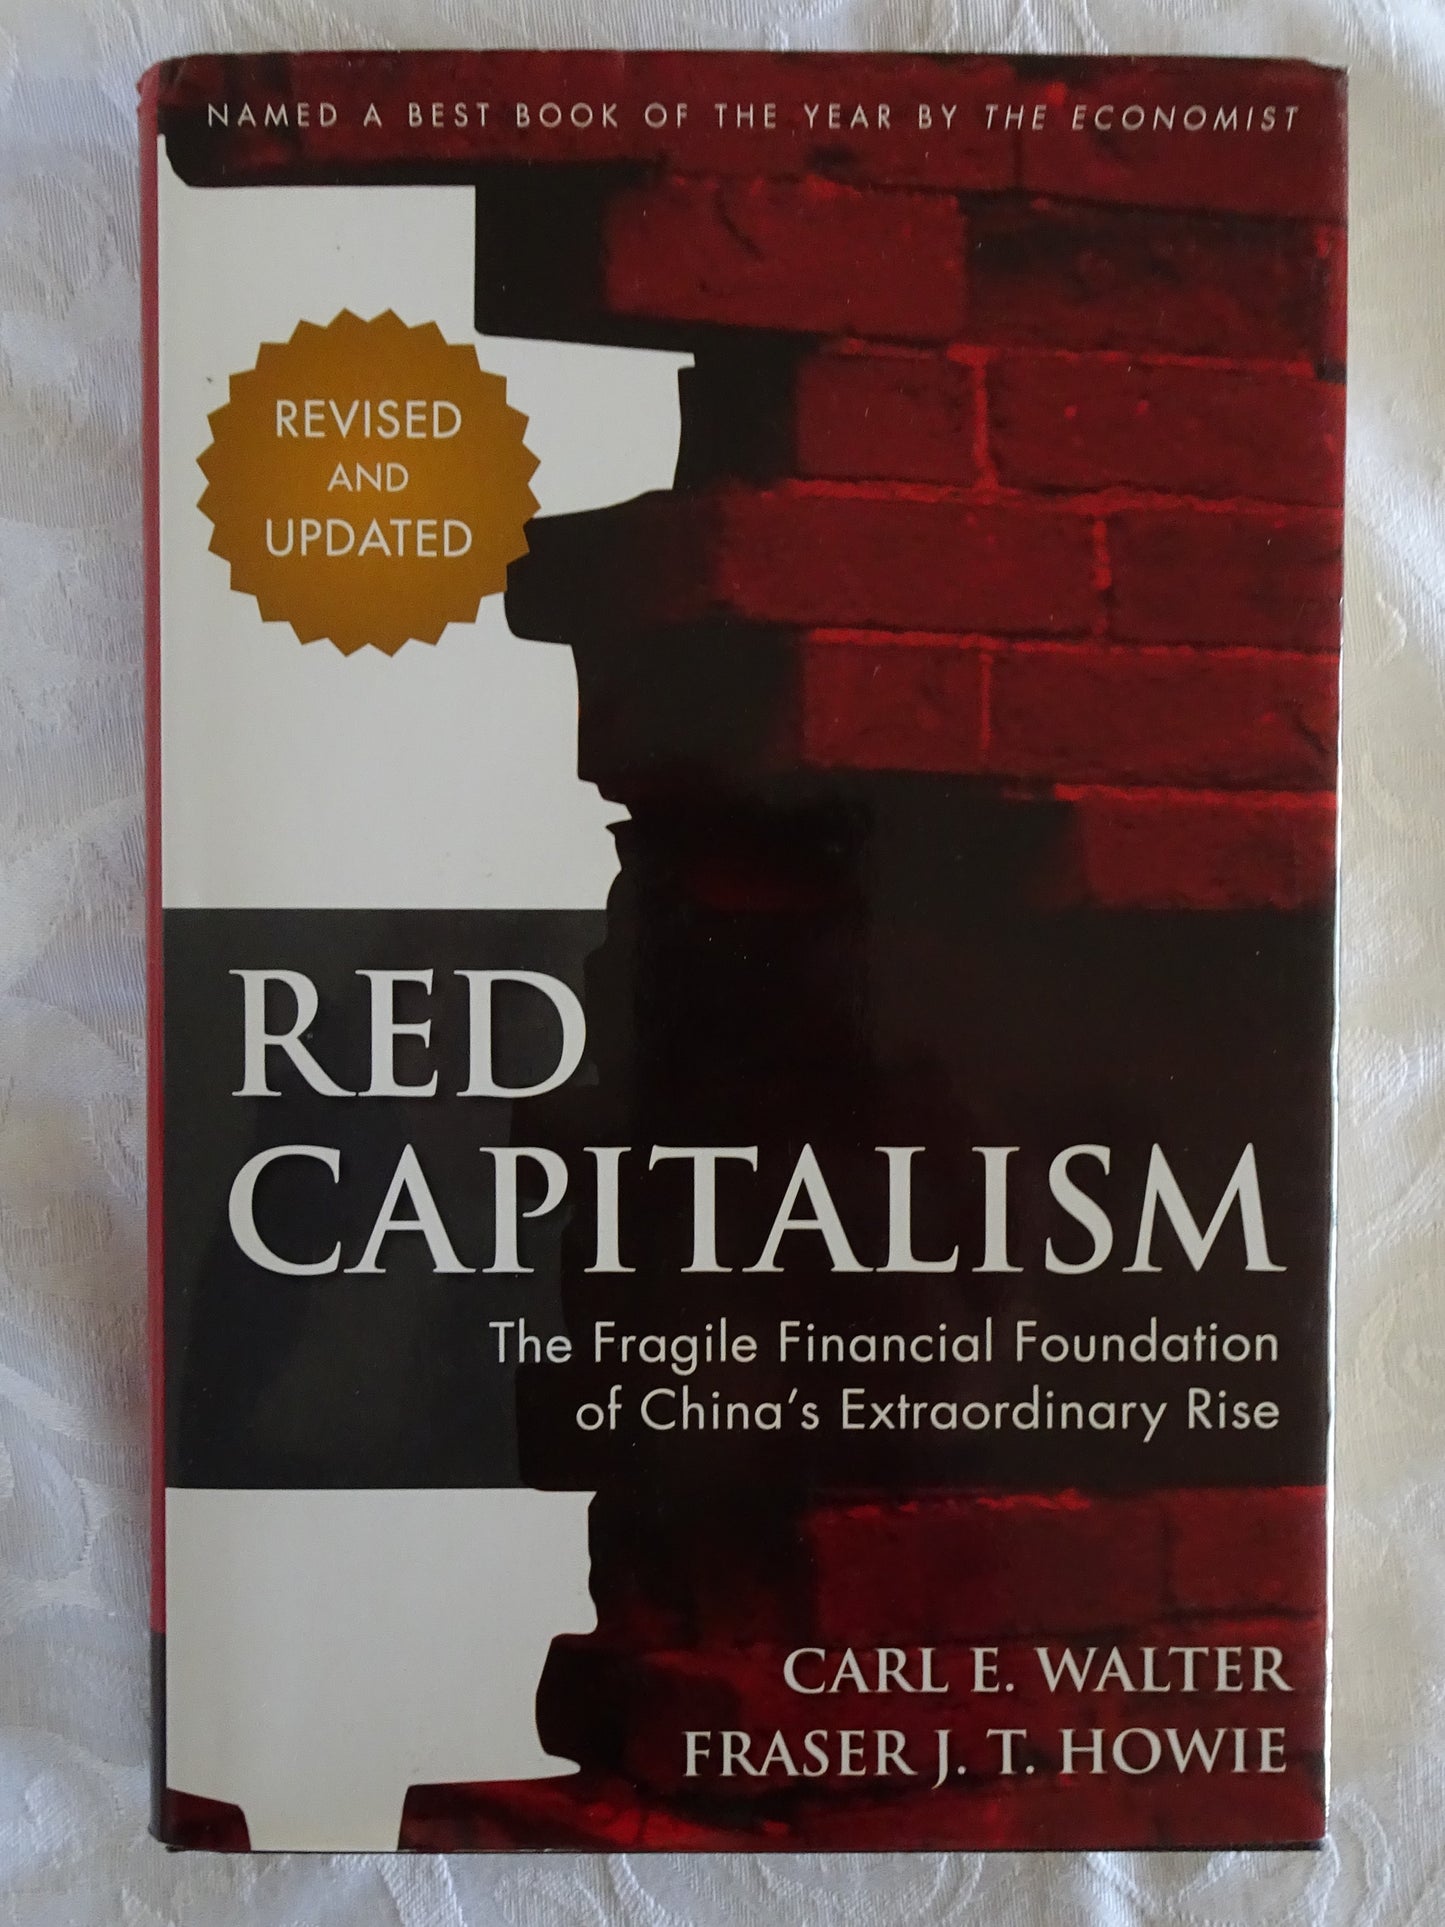 Red Capitalism by Carl E. Walter and Fraser J. T. Howie